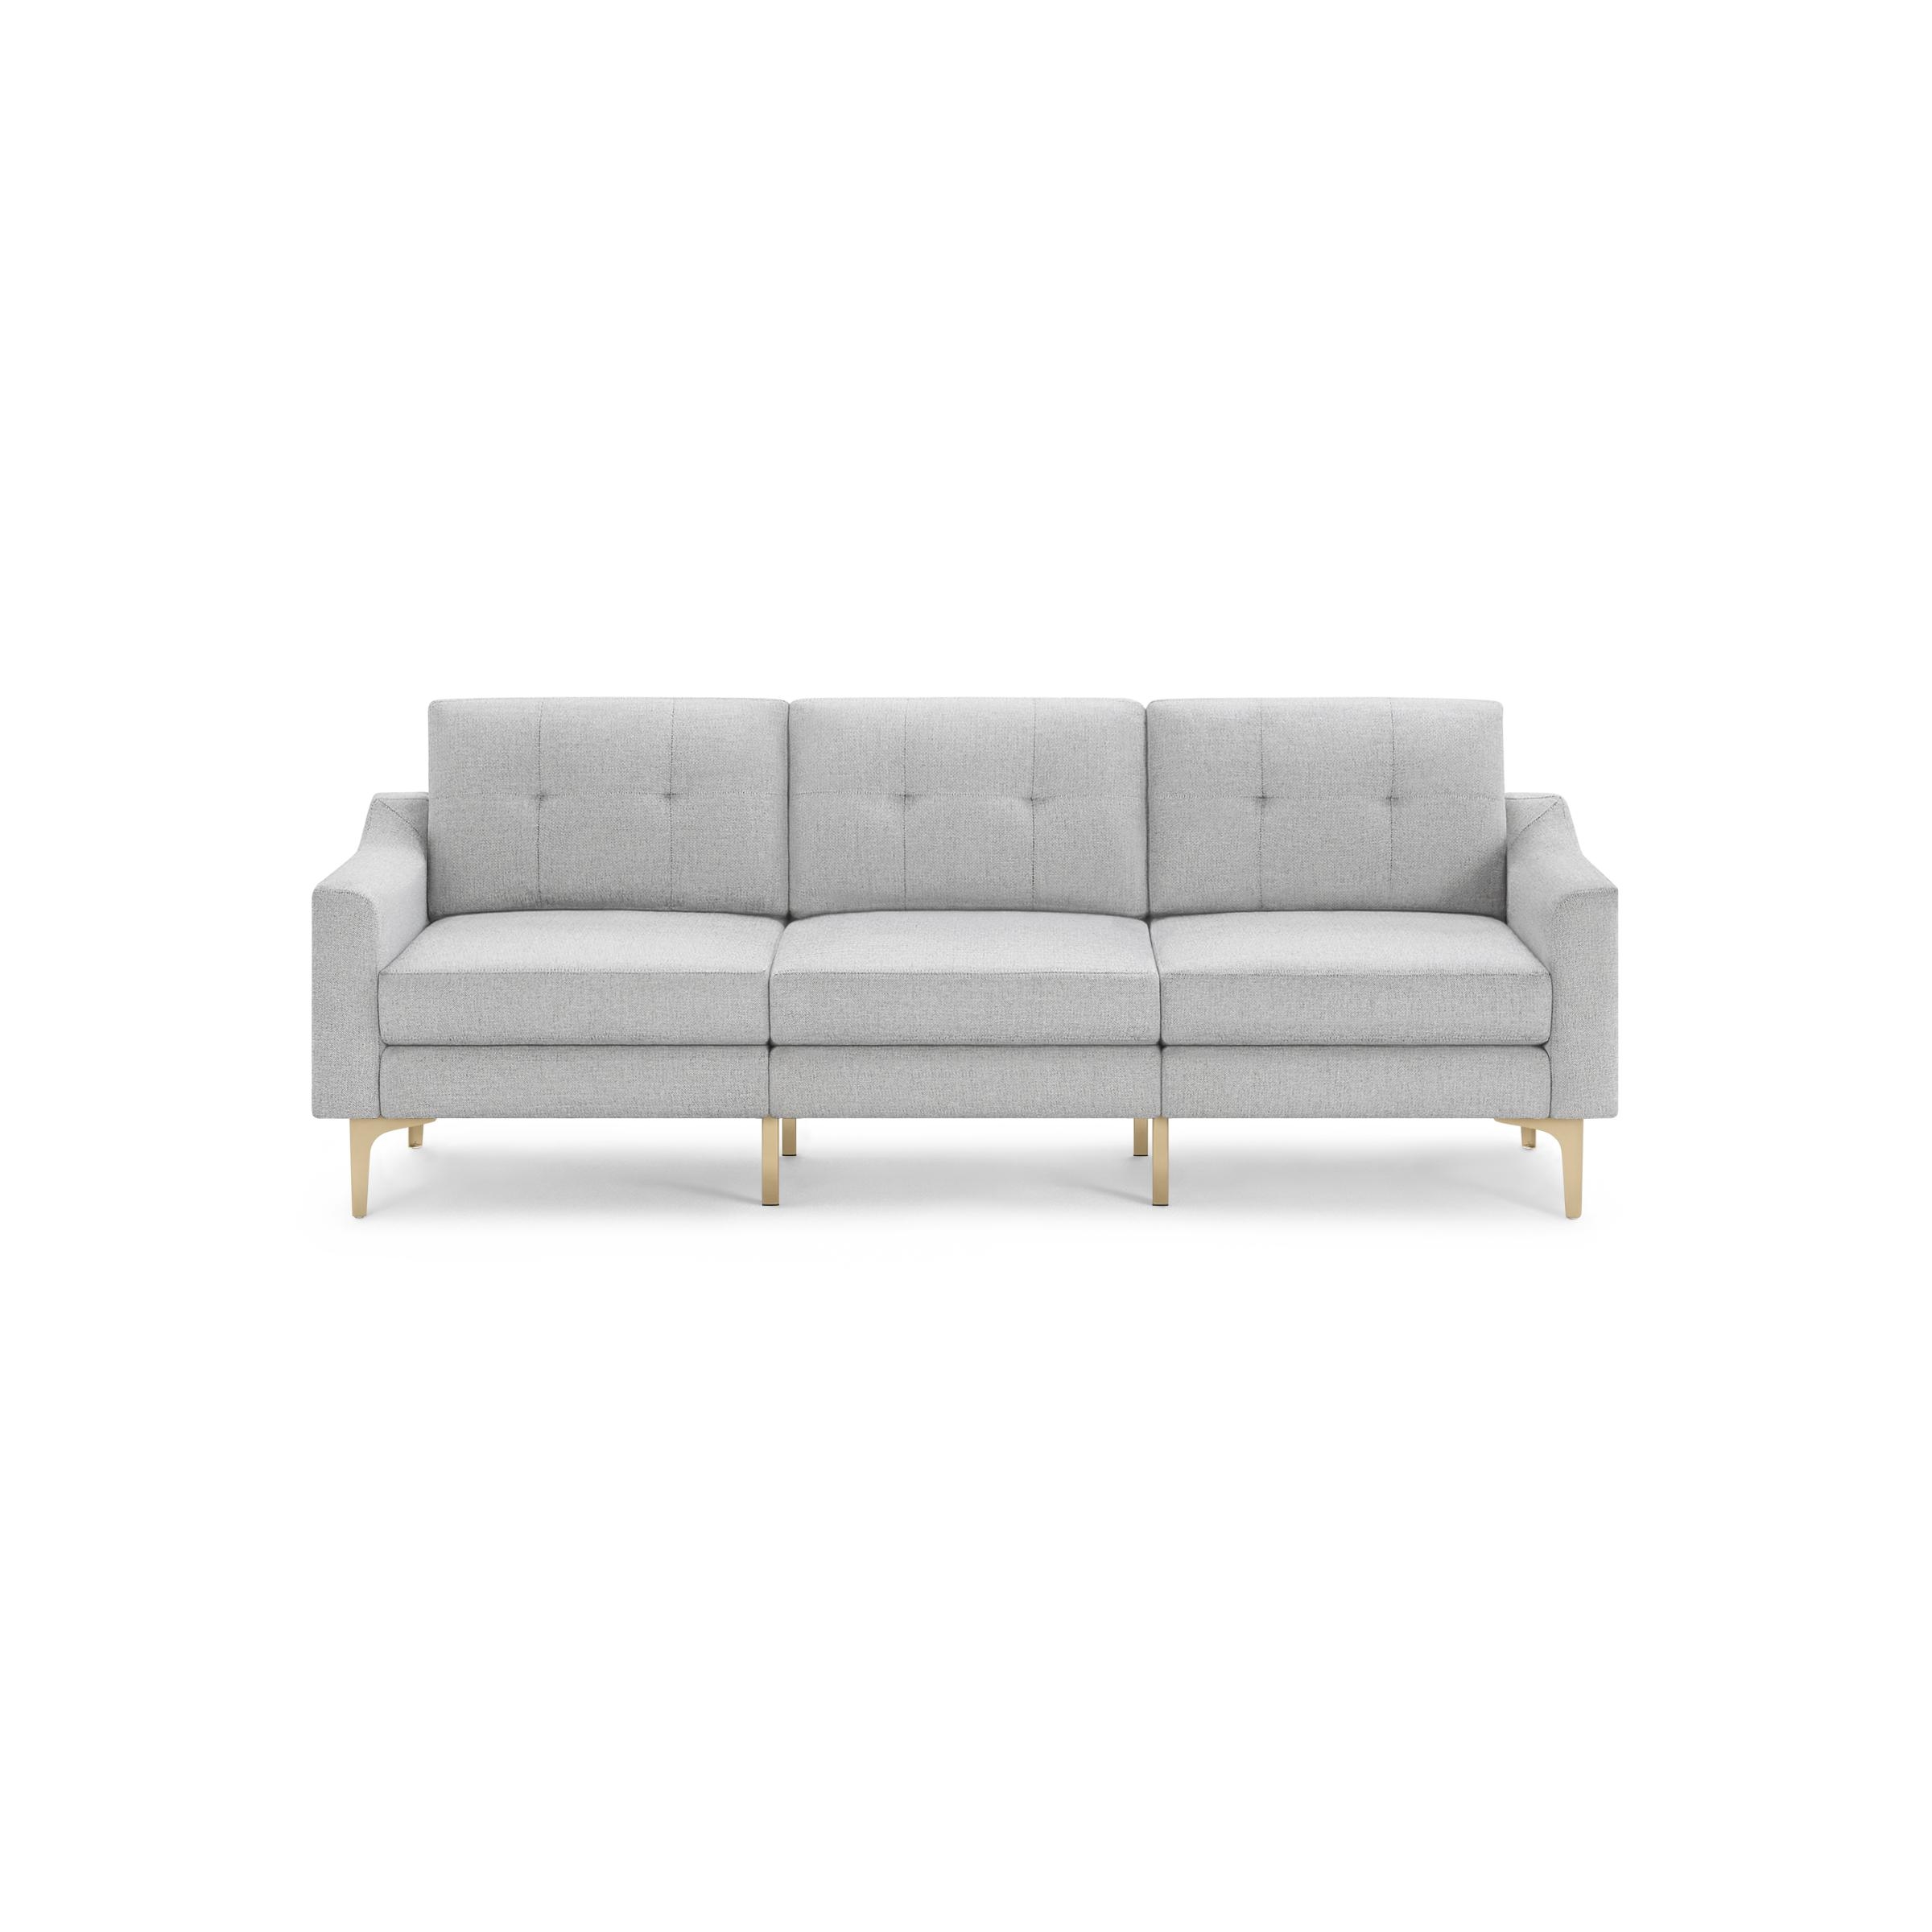 Nomad Sofa in Crushed Gravel, Brass Legs - Image 1